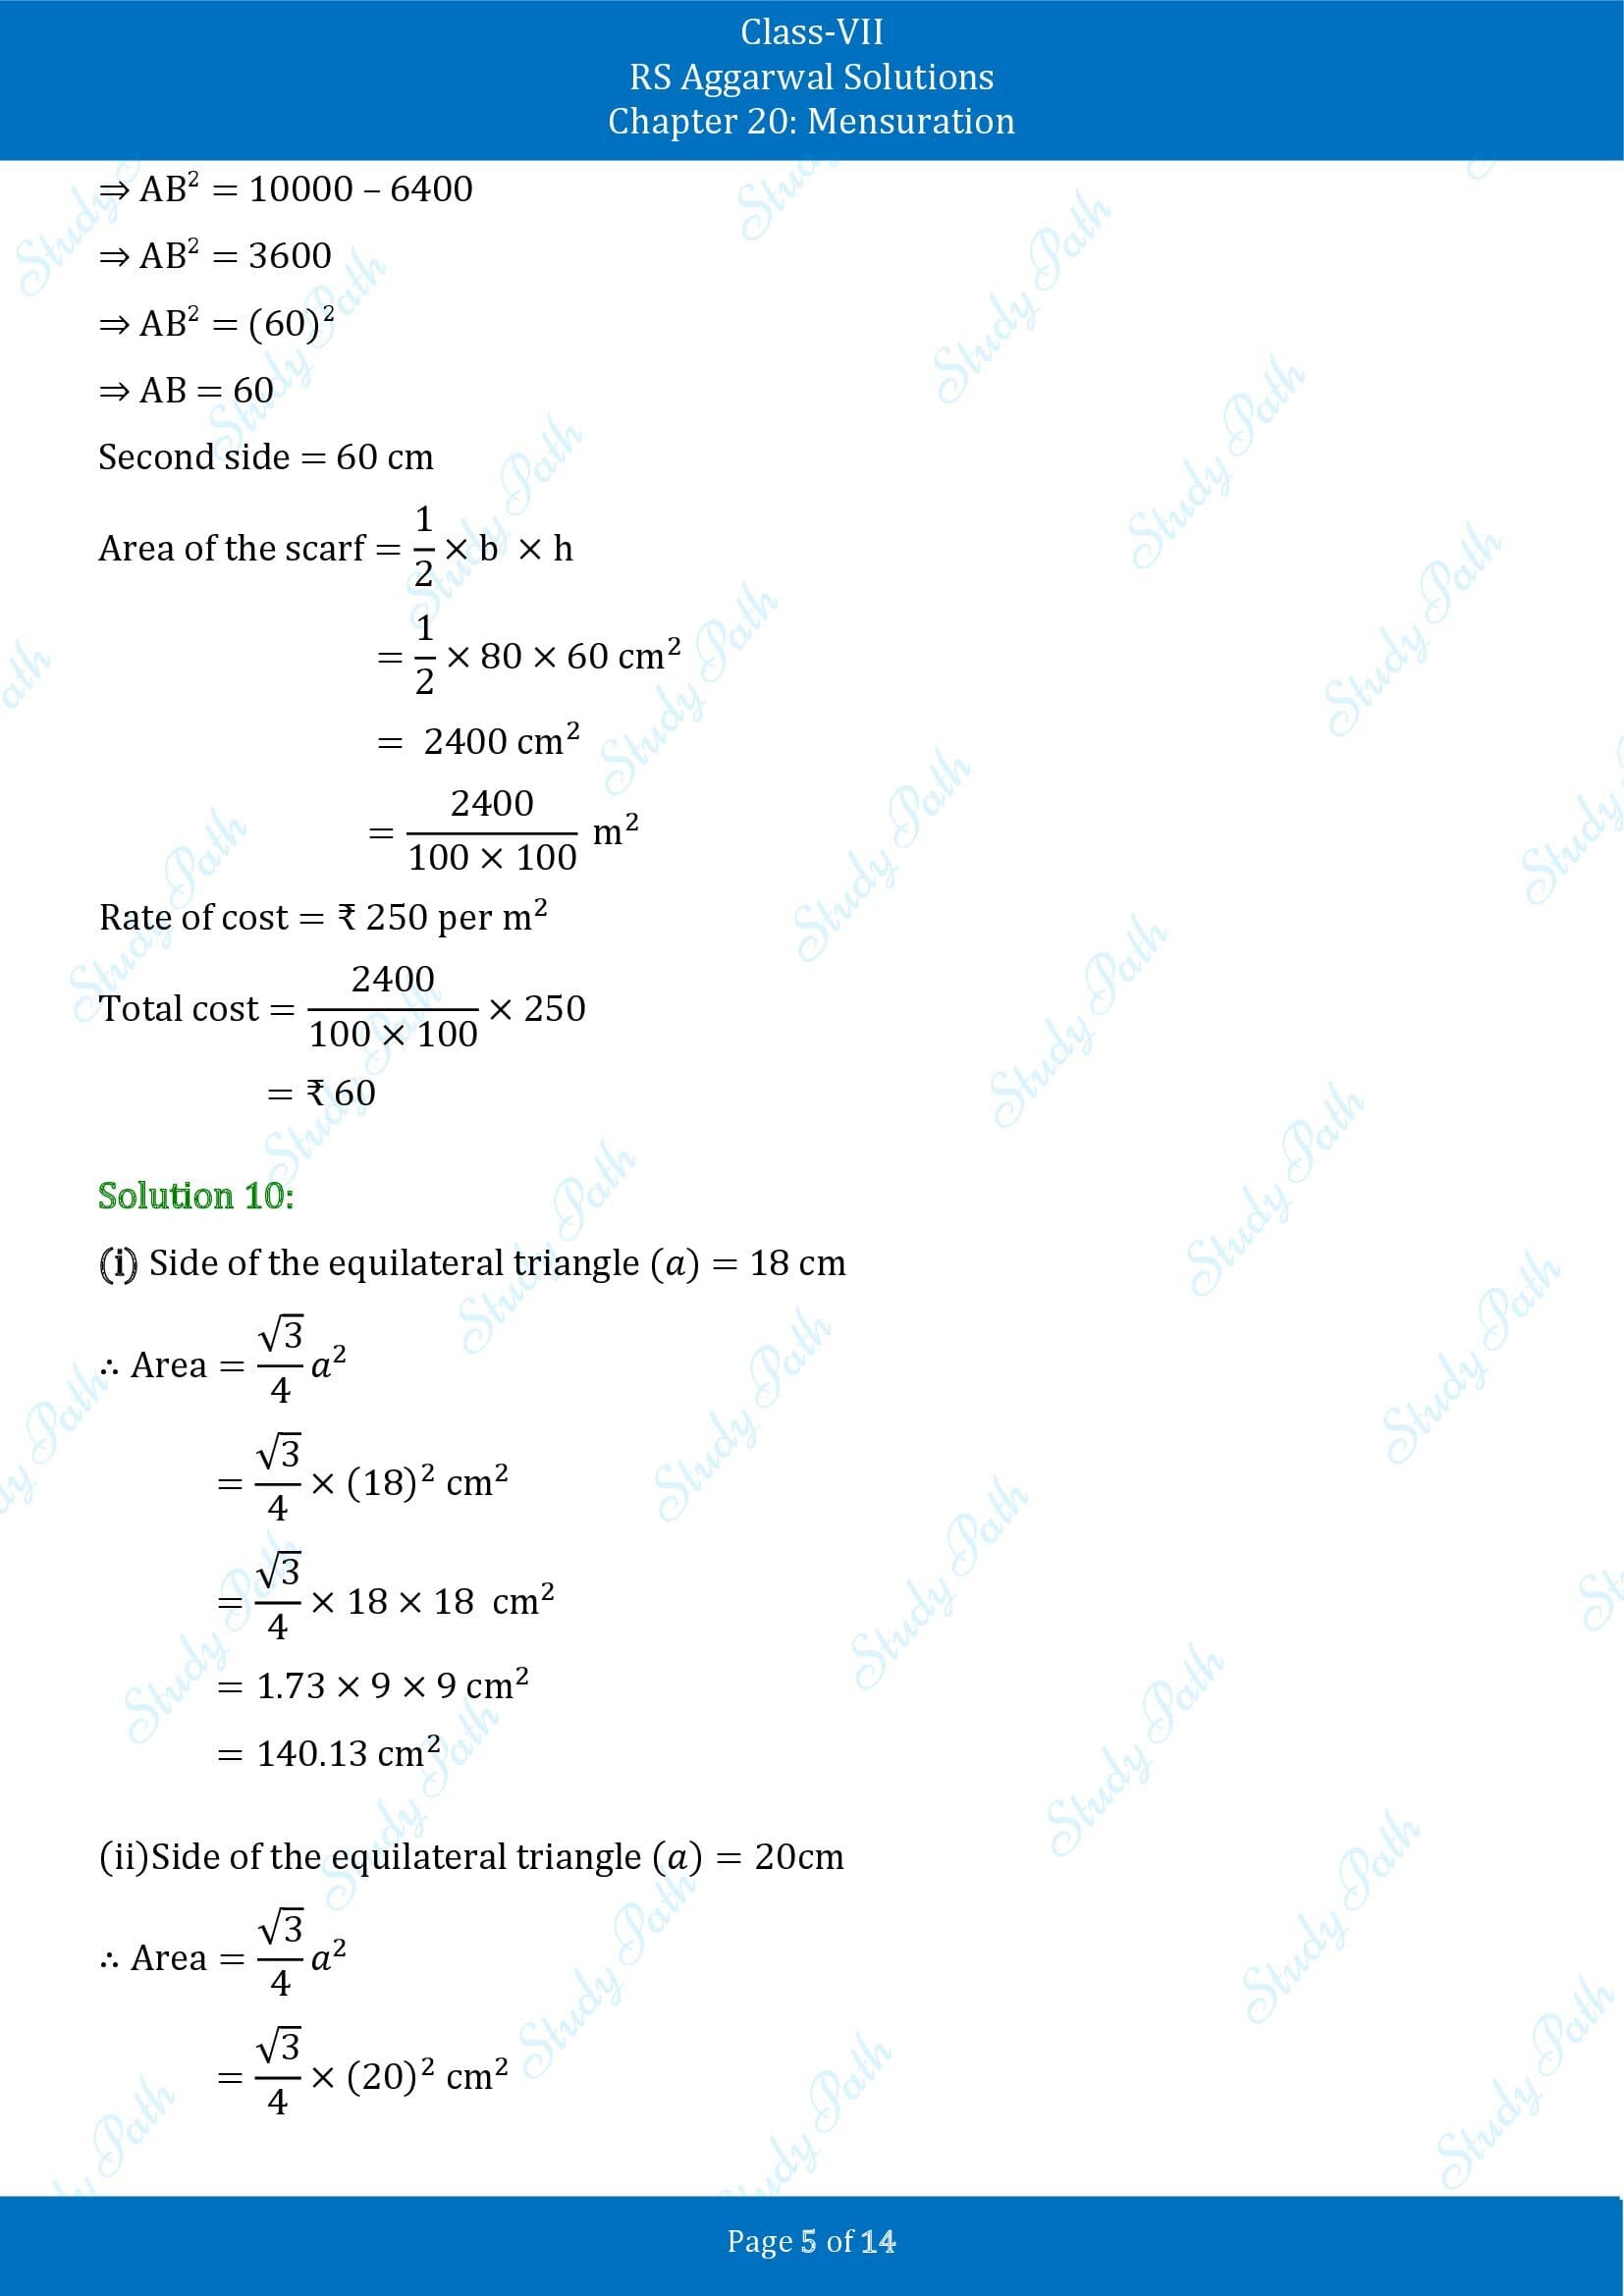 RS Aggarwal Solutions Class 7 Chapter 20 Mensuration Exercise 20D 00005